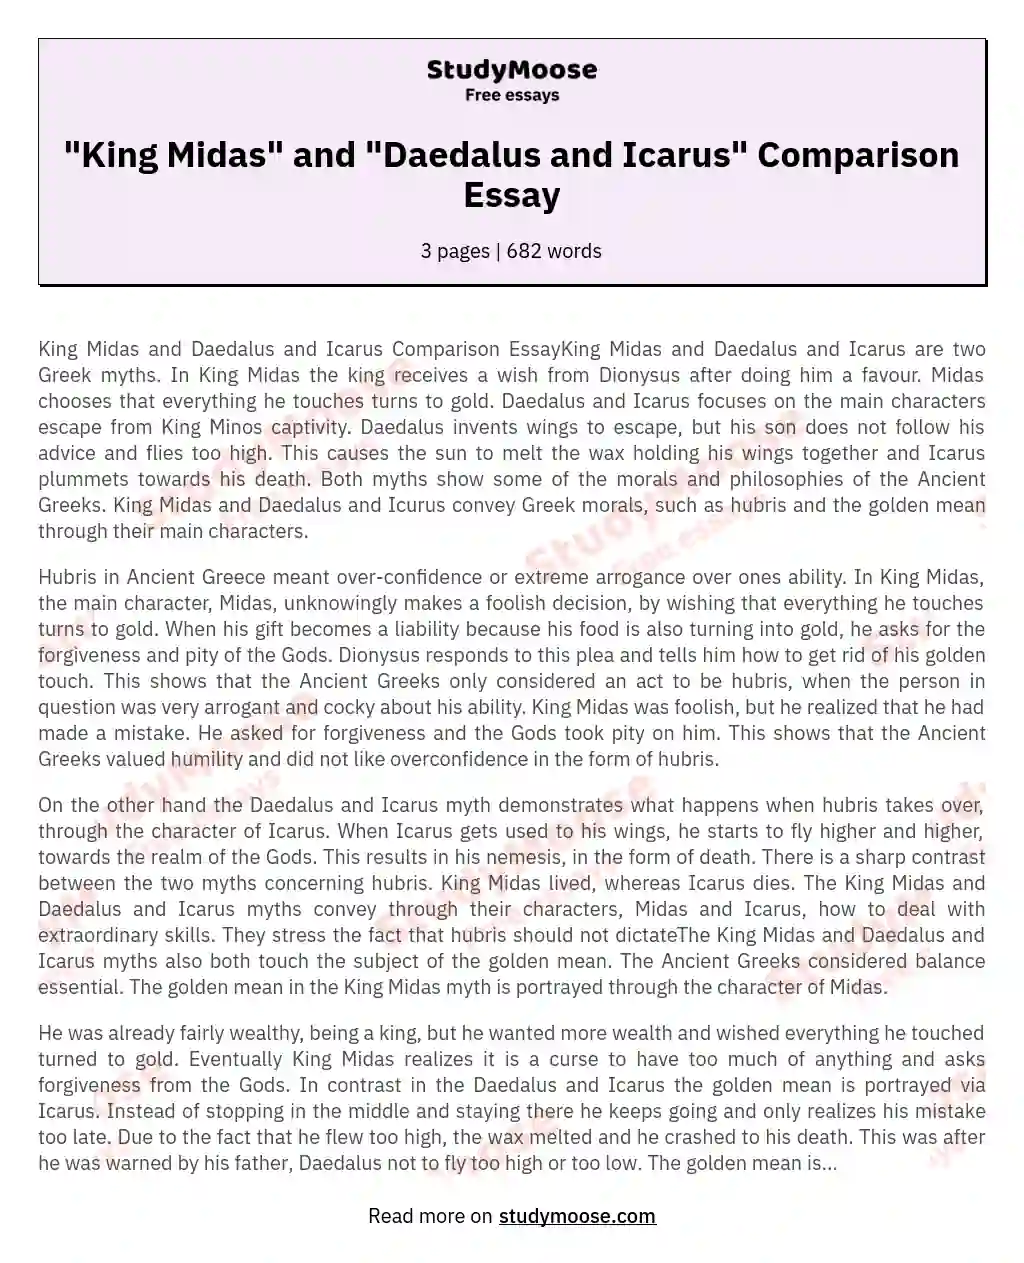 "King Midas" and "Daedalus and Icarus" Comparison Essay essay